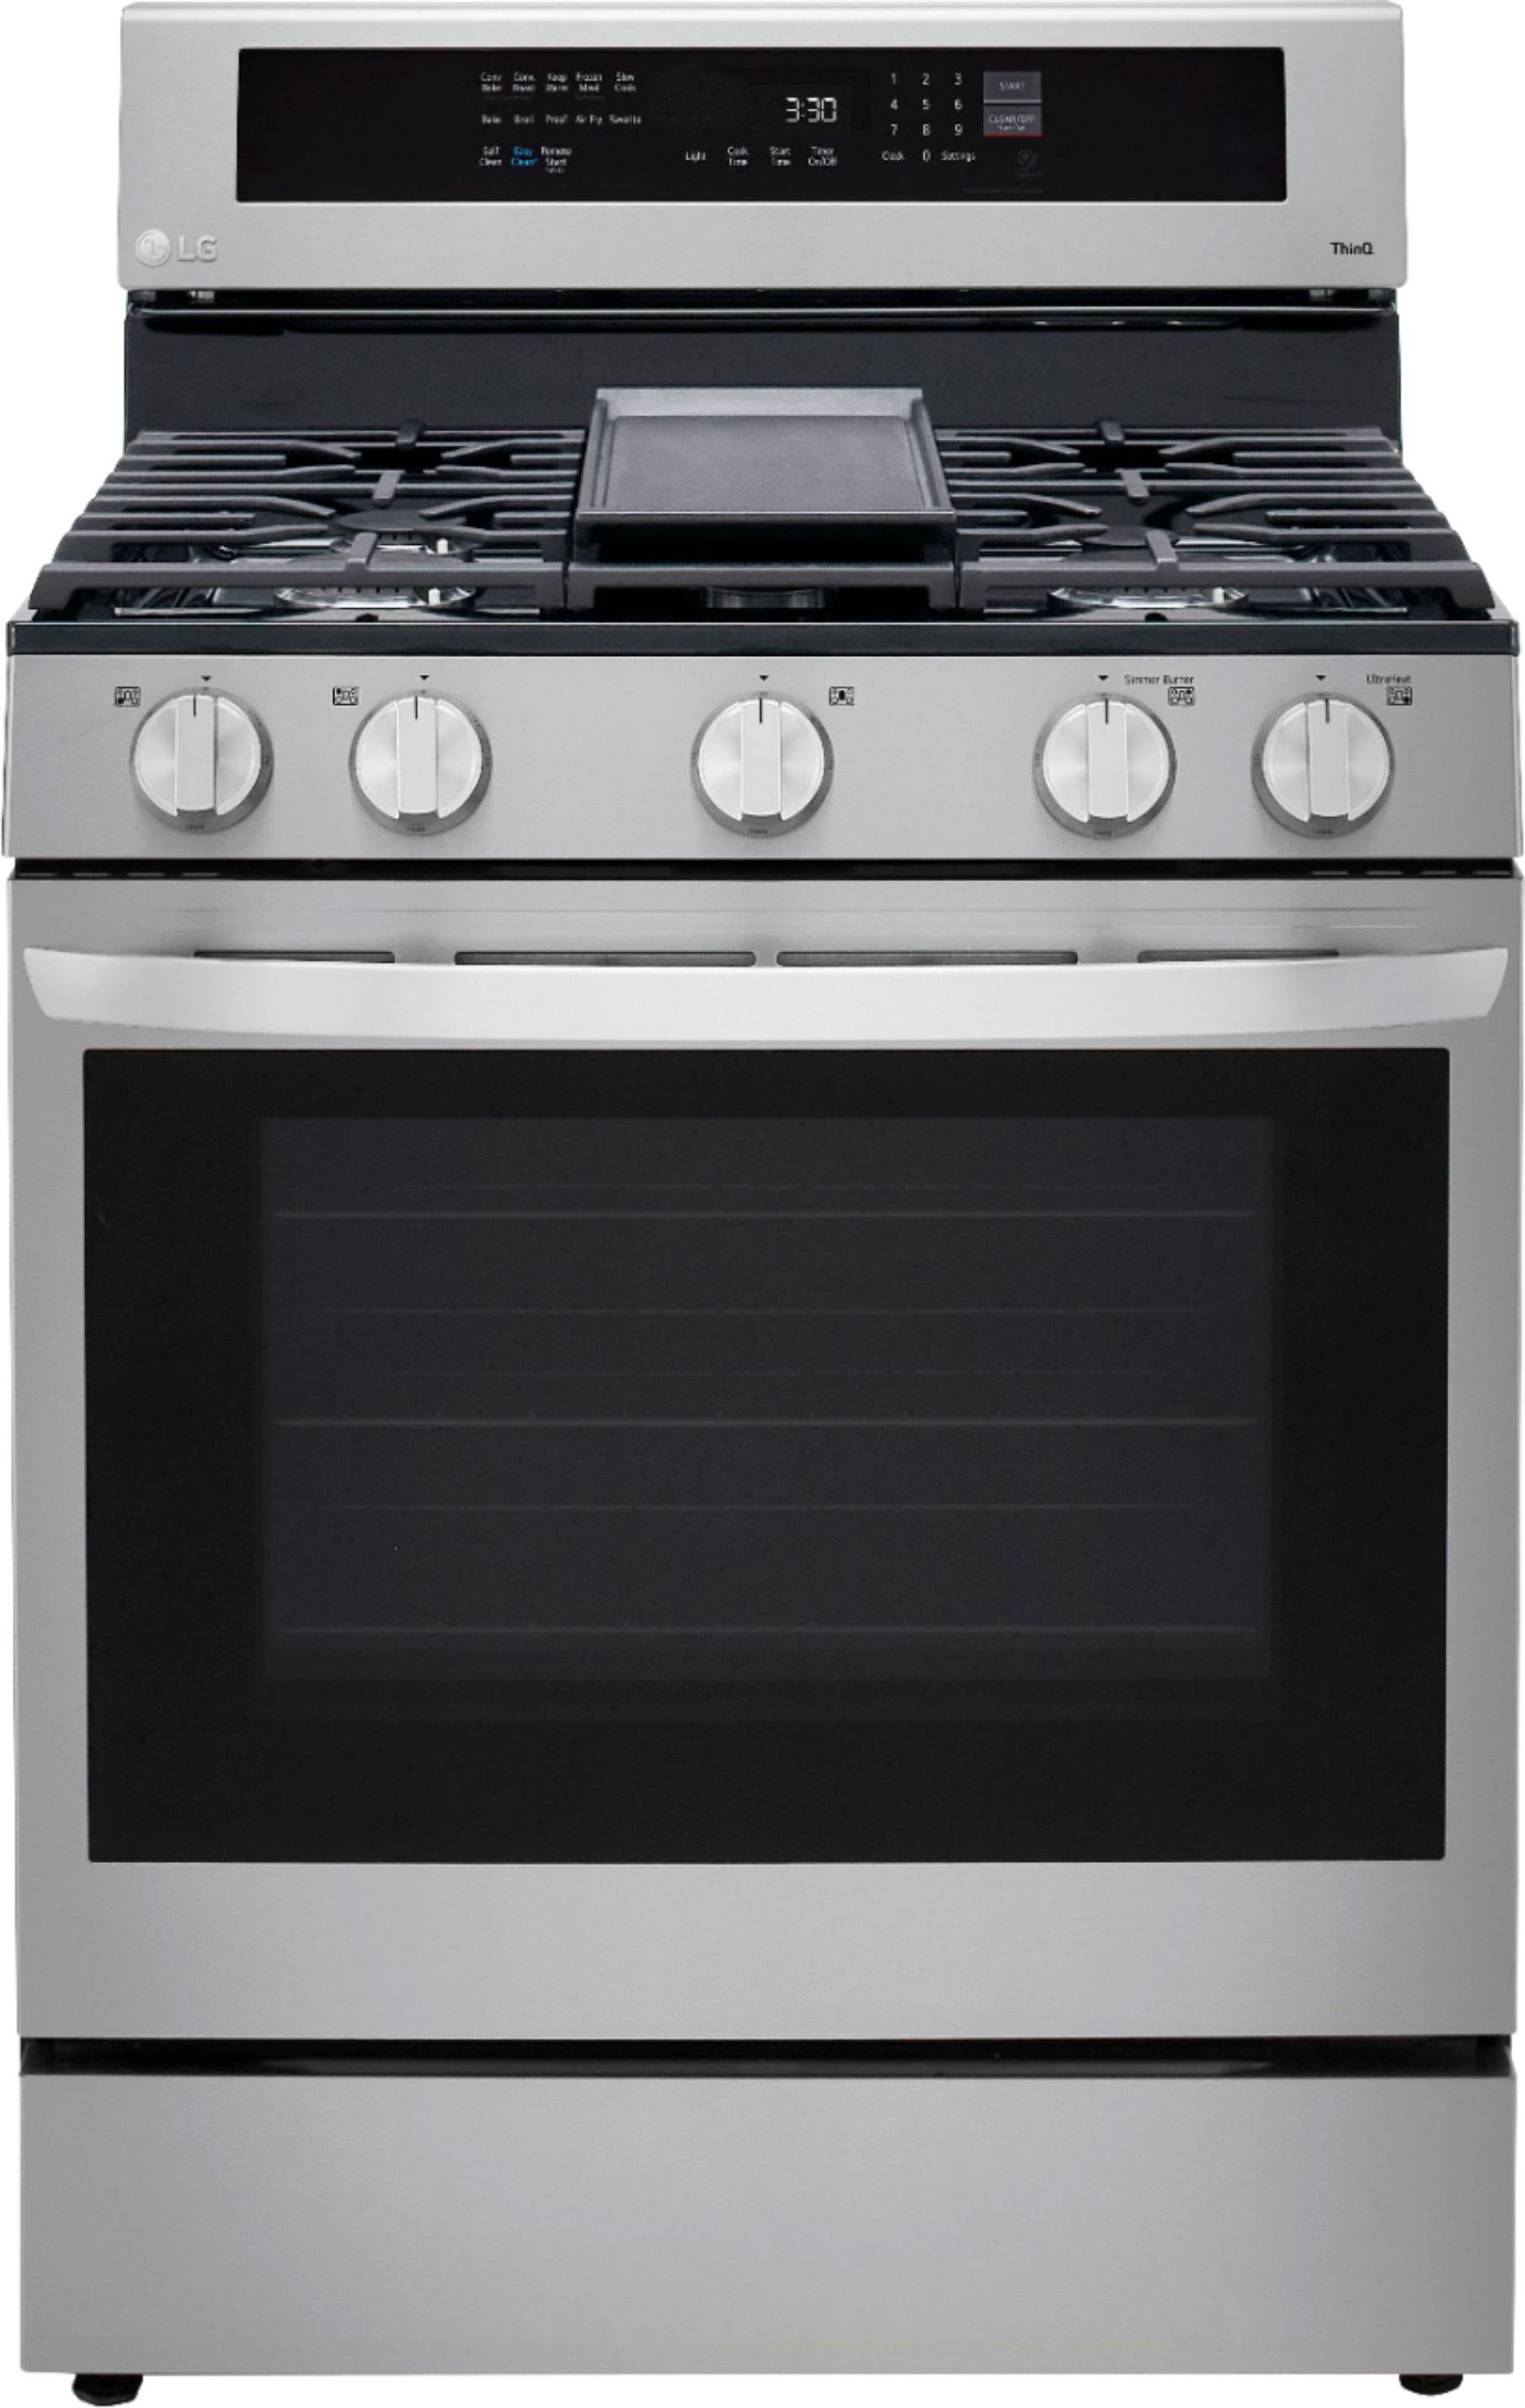  5.8 cu ft. Smart Wi-Fi Enabled True Convection